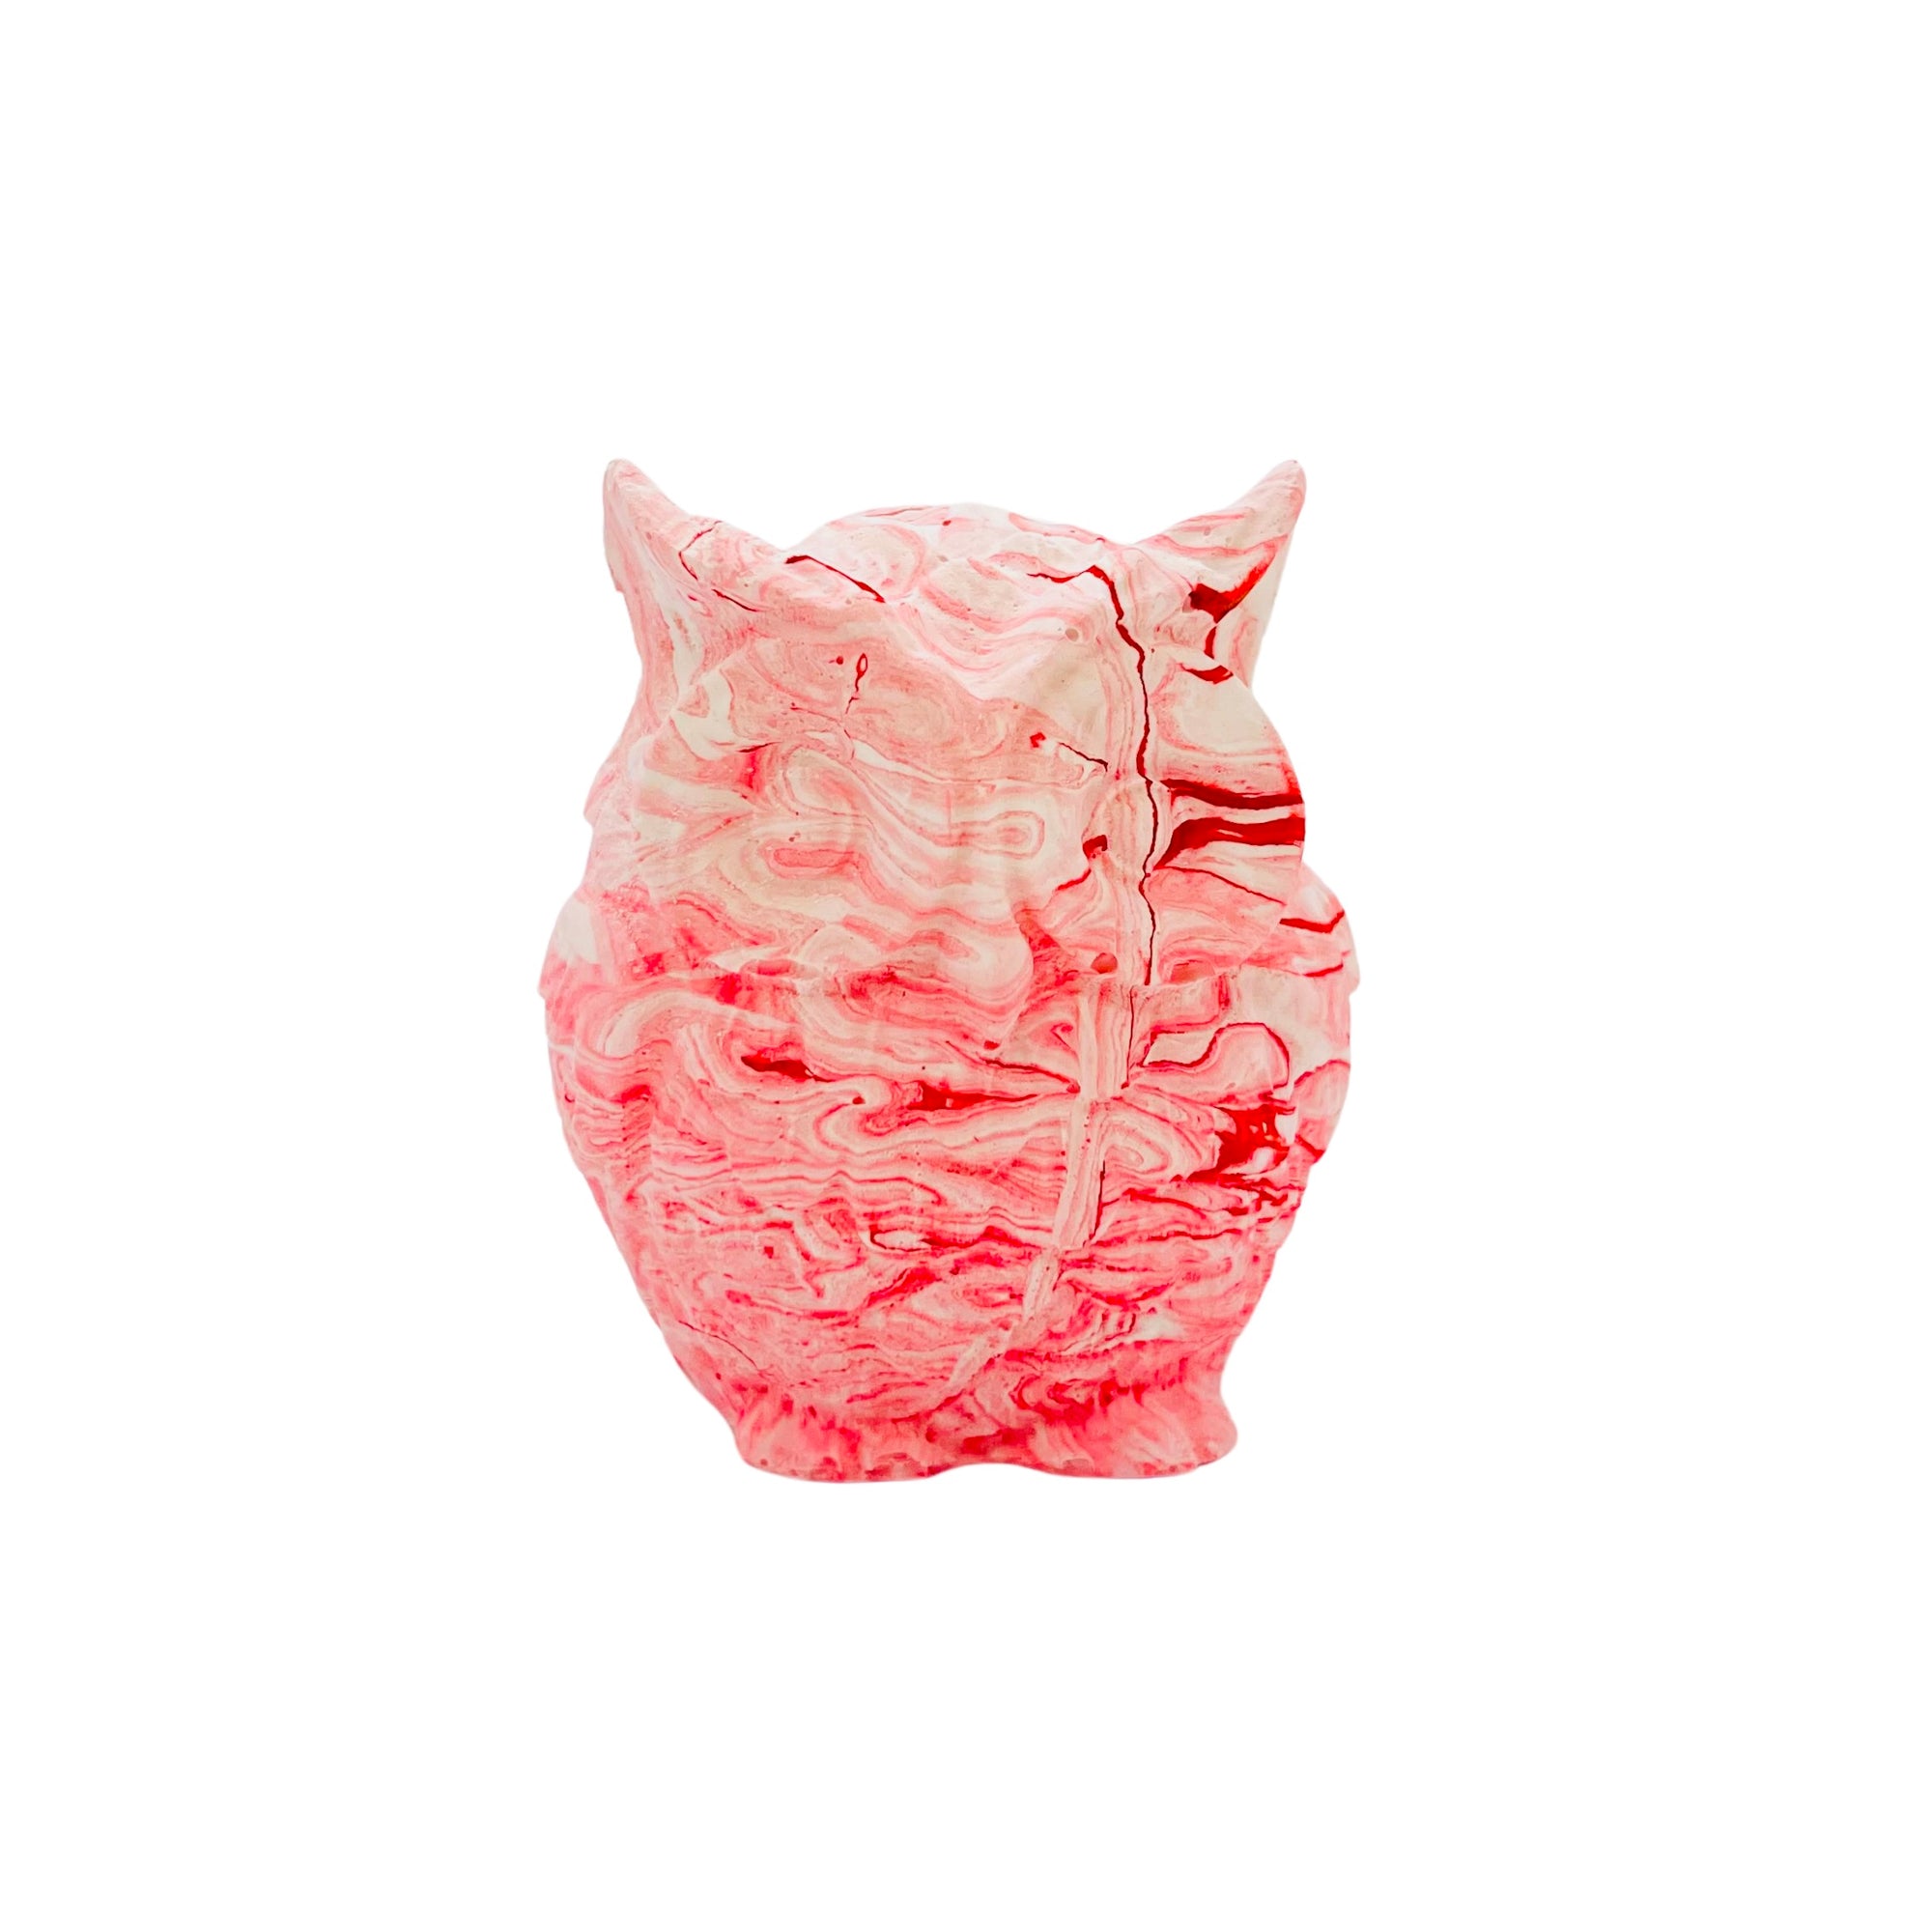 A small owl made from Jesmonite measuring 5cm in height marbled with red pigment.